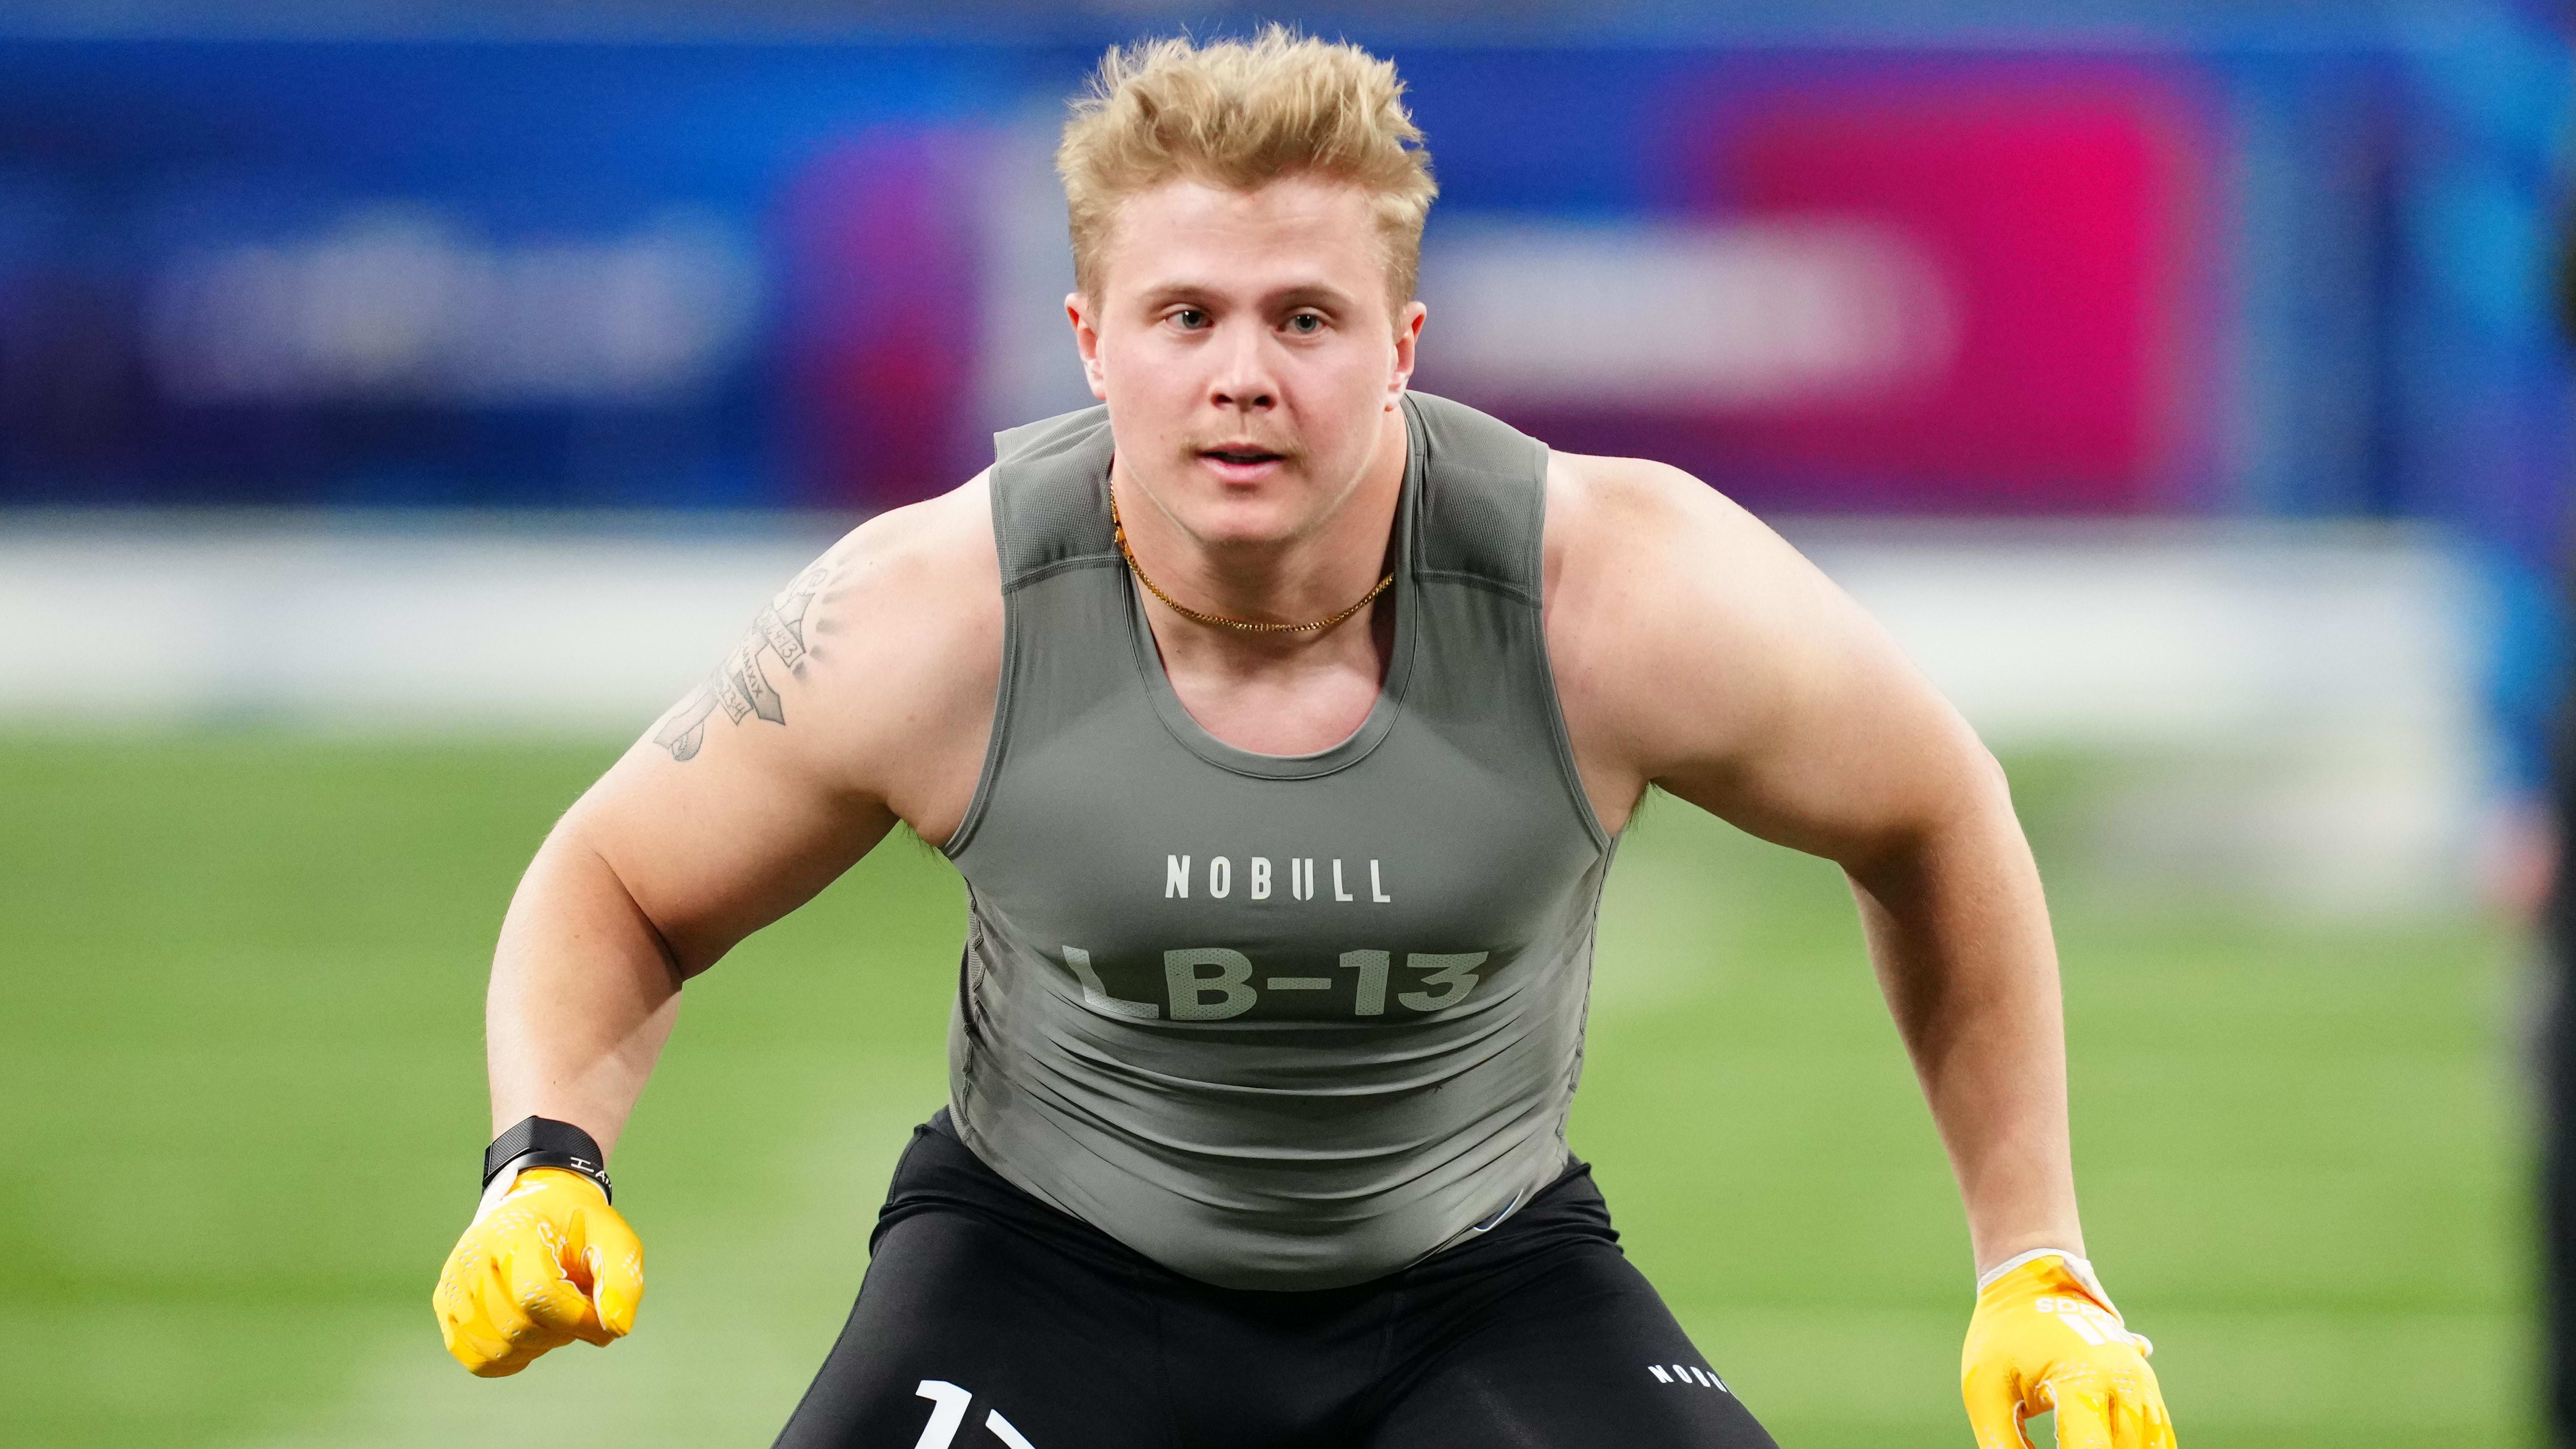 Wyoming linebacker Easton Gibbs (LB13) works out during the NFL Scouting Combine.